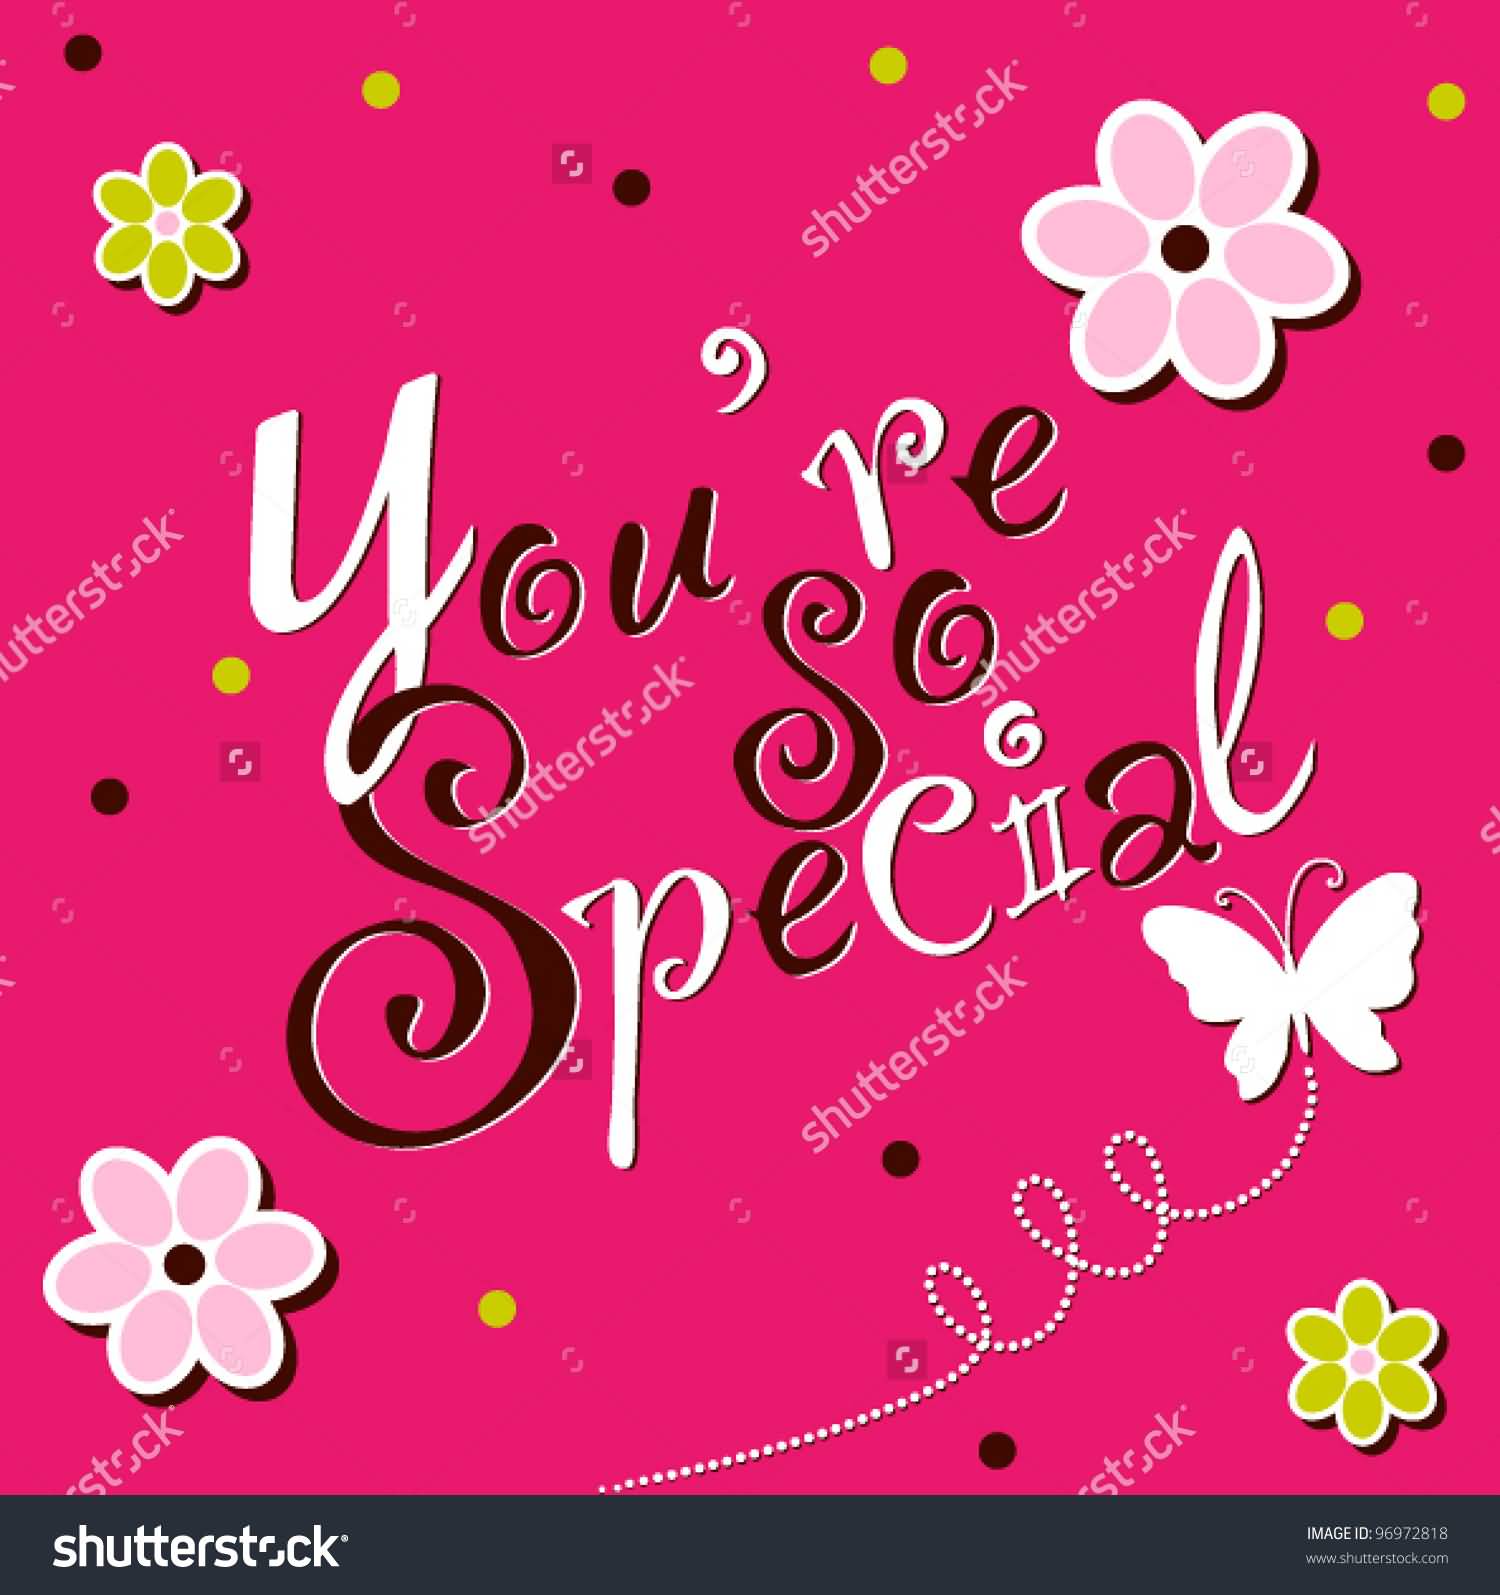 You're So Special Greeting Card